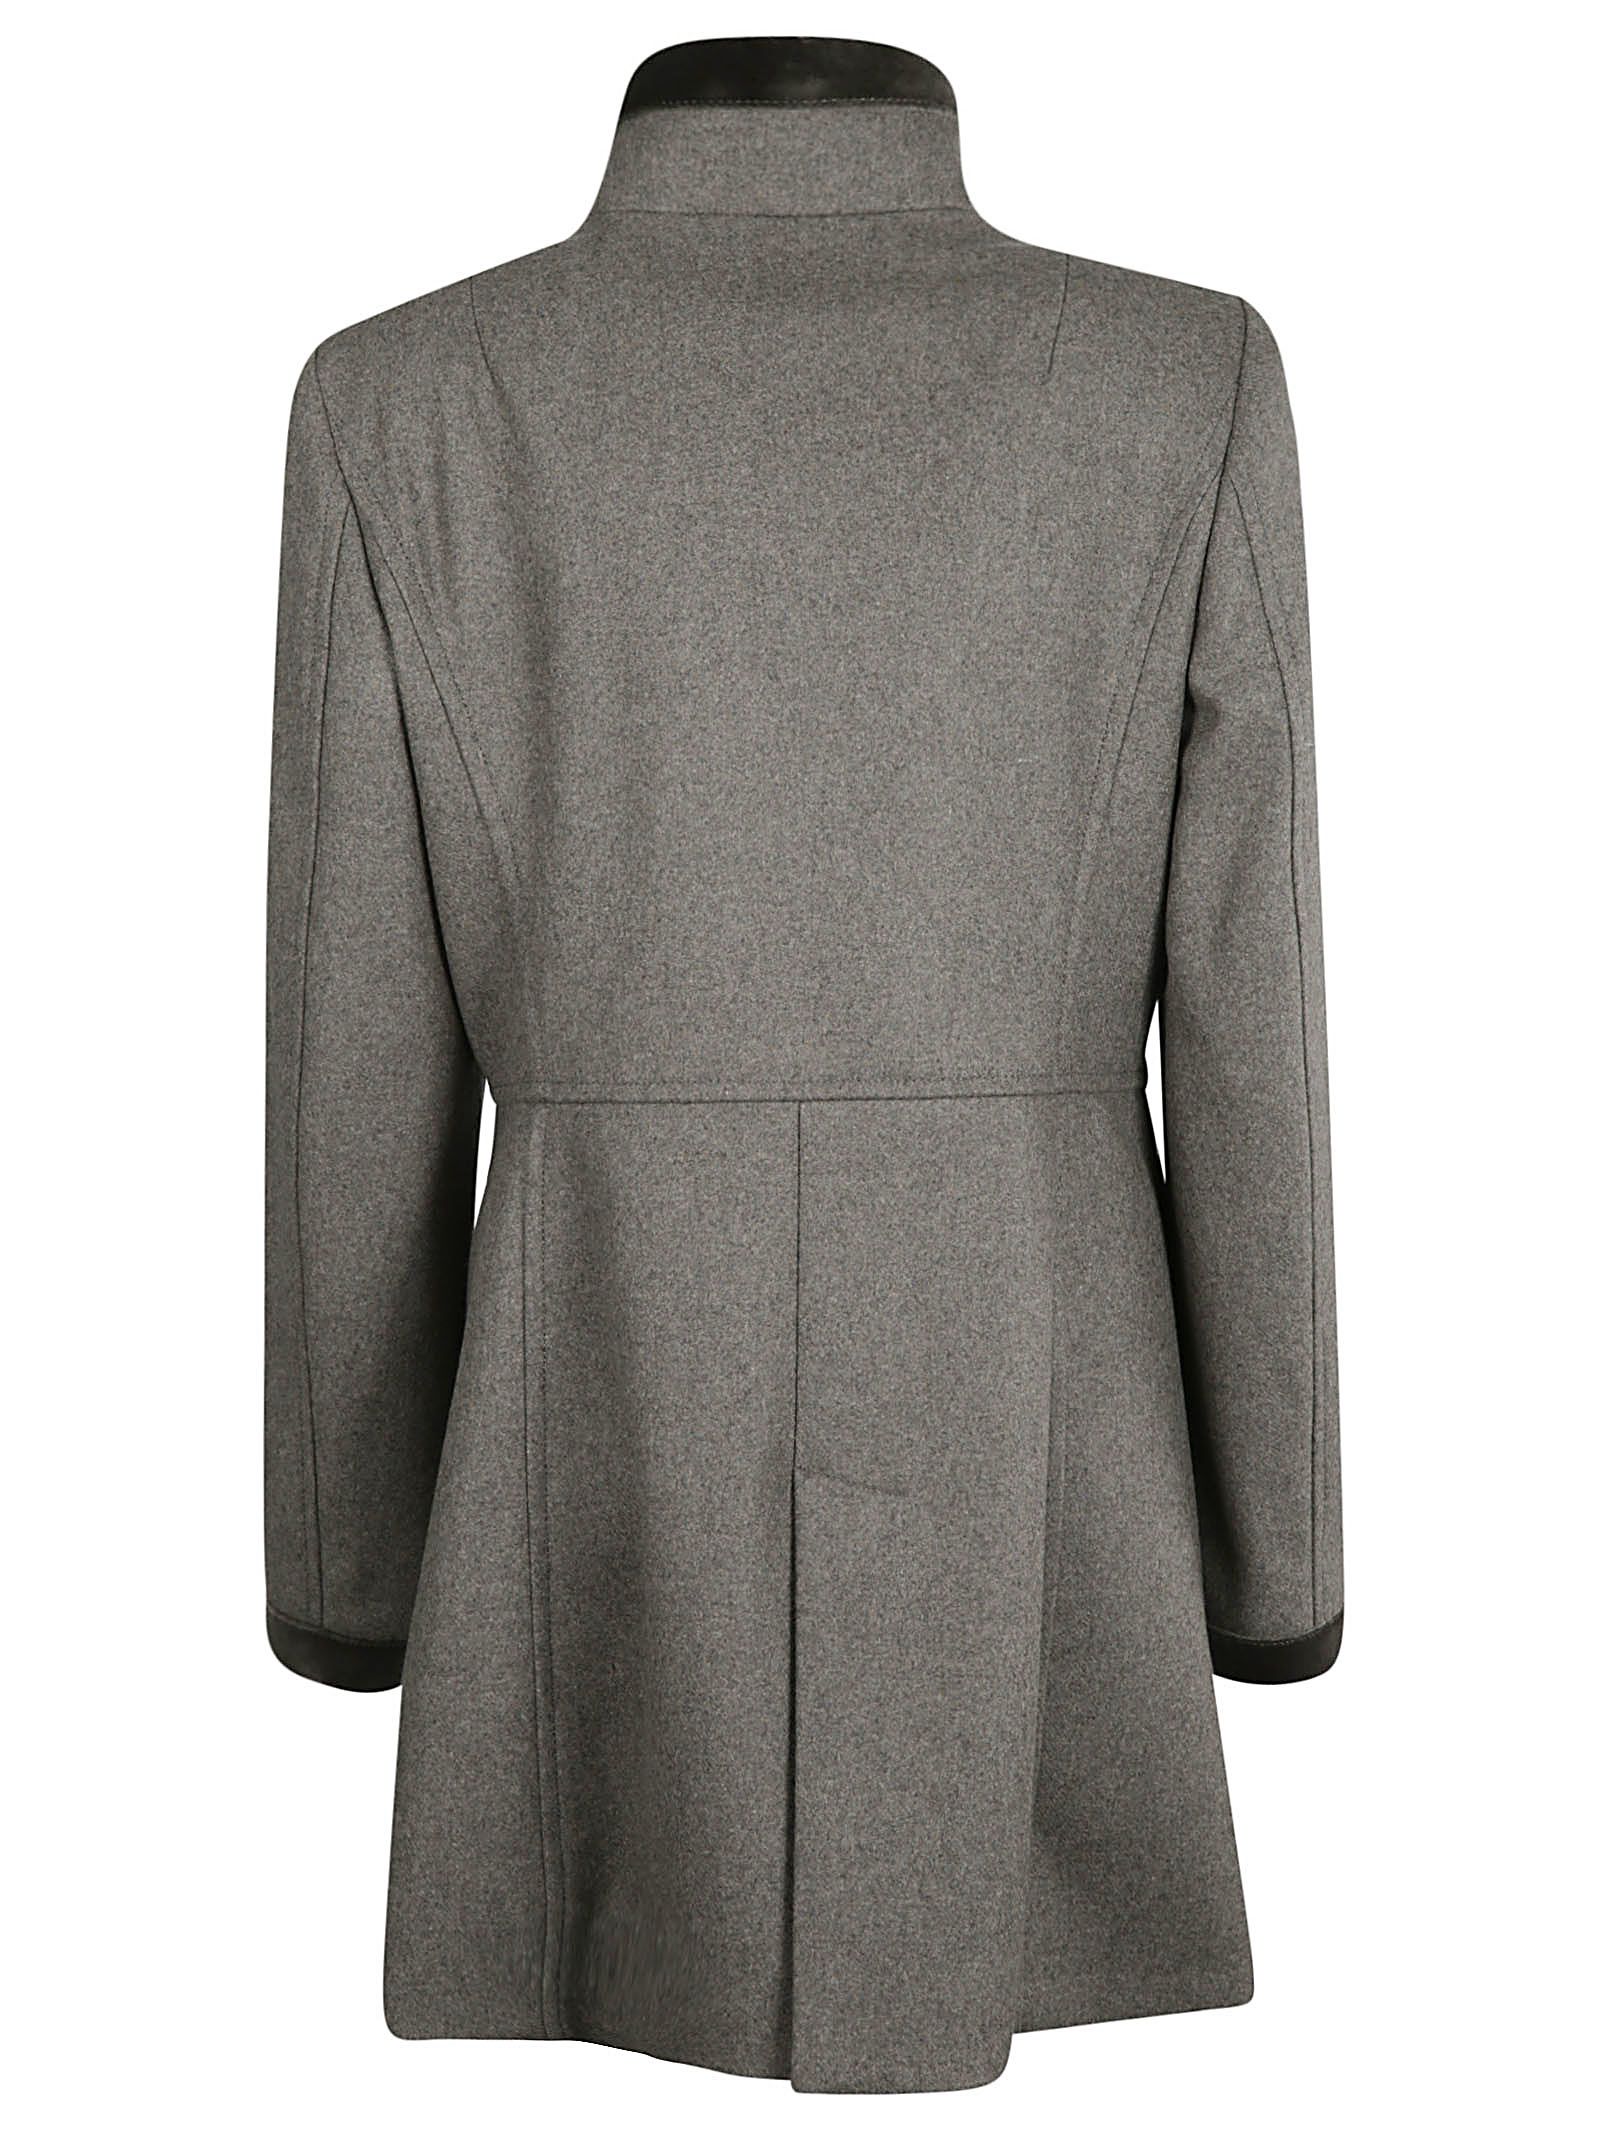 italist | Best price in the market for Fay Fay Virginia Coat ...